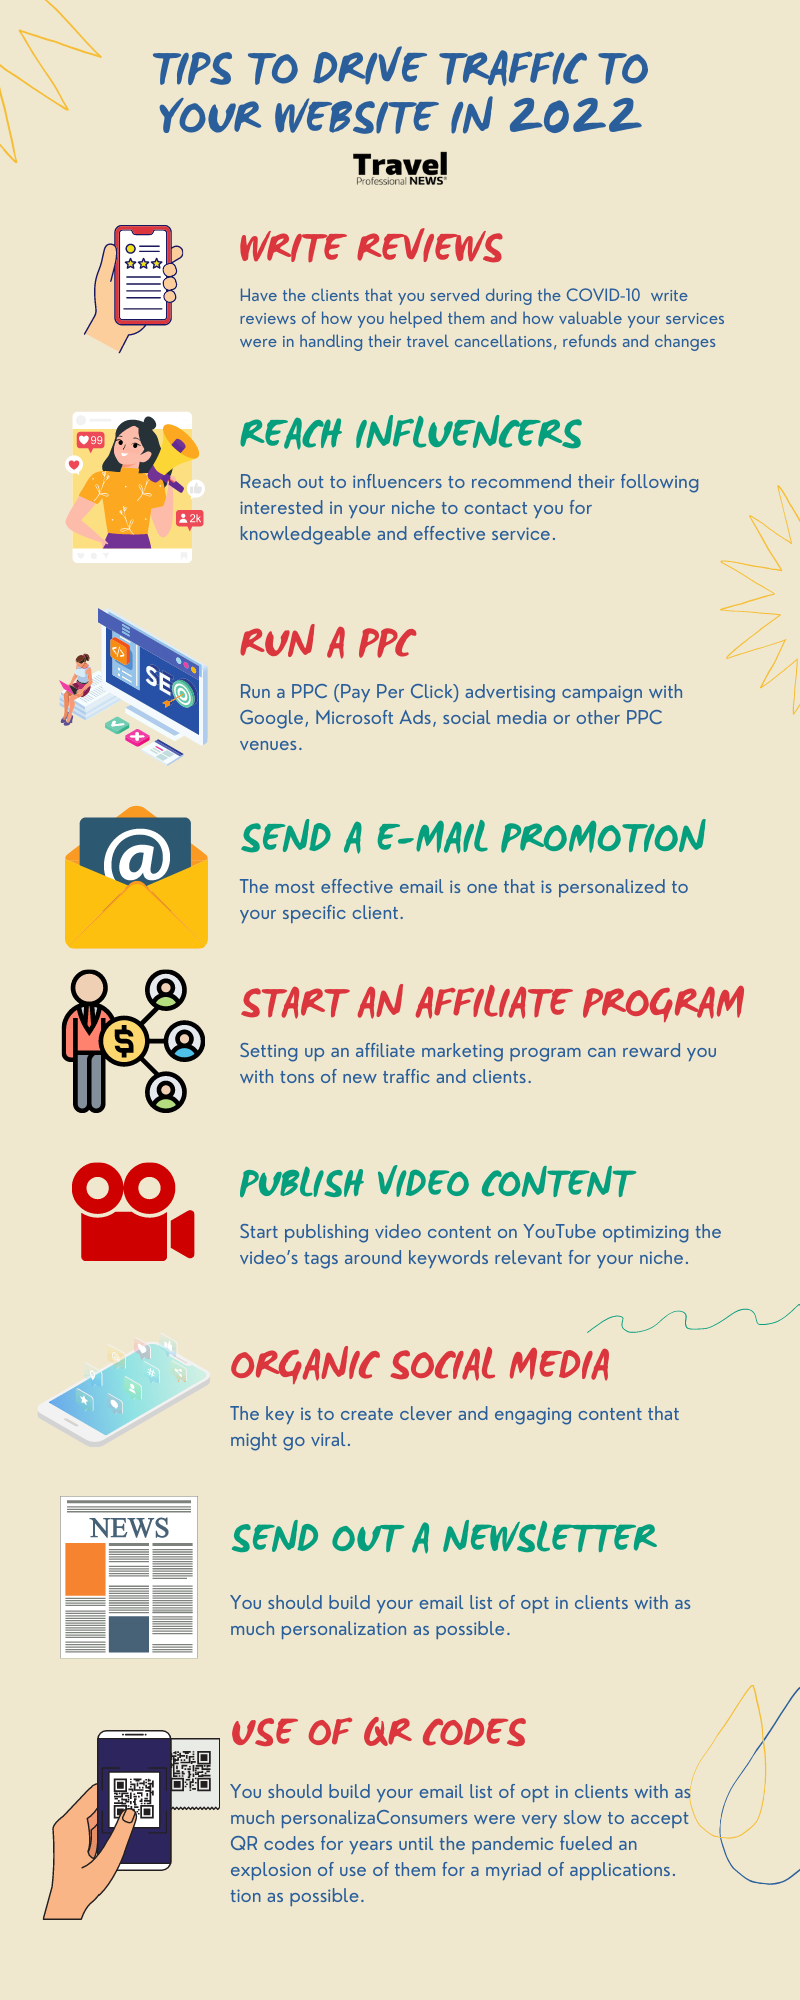 30-Tips-to-Drive-Traffic-to-Your-Website-in-2022-Infographic-1-TPN